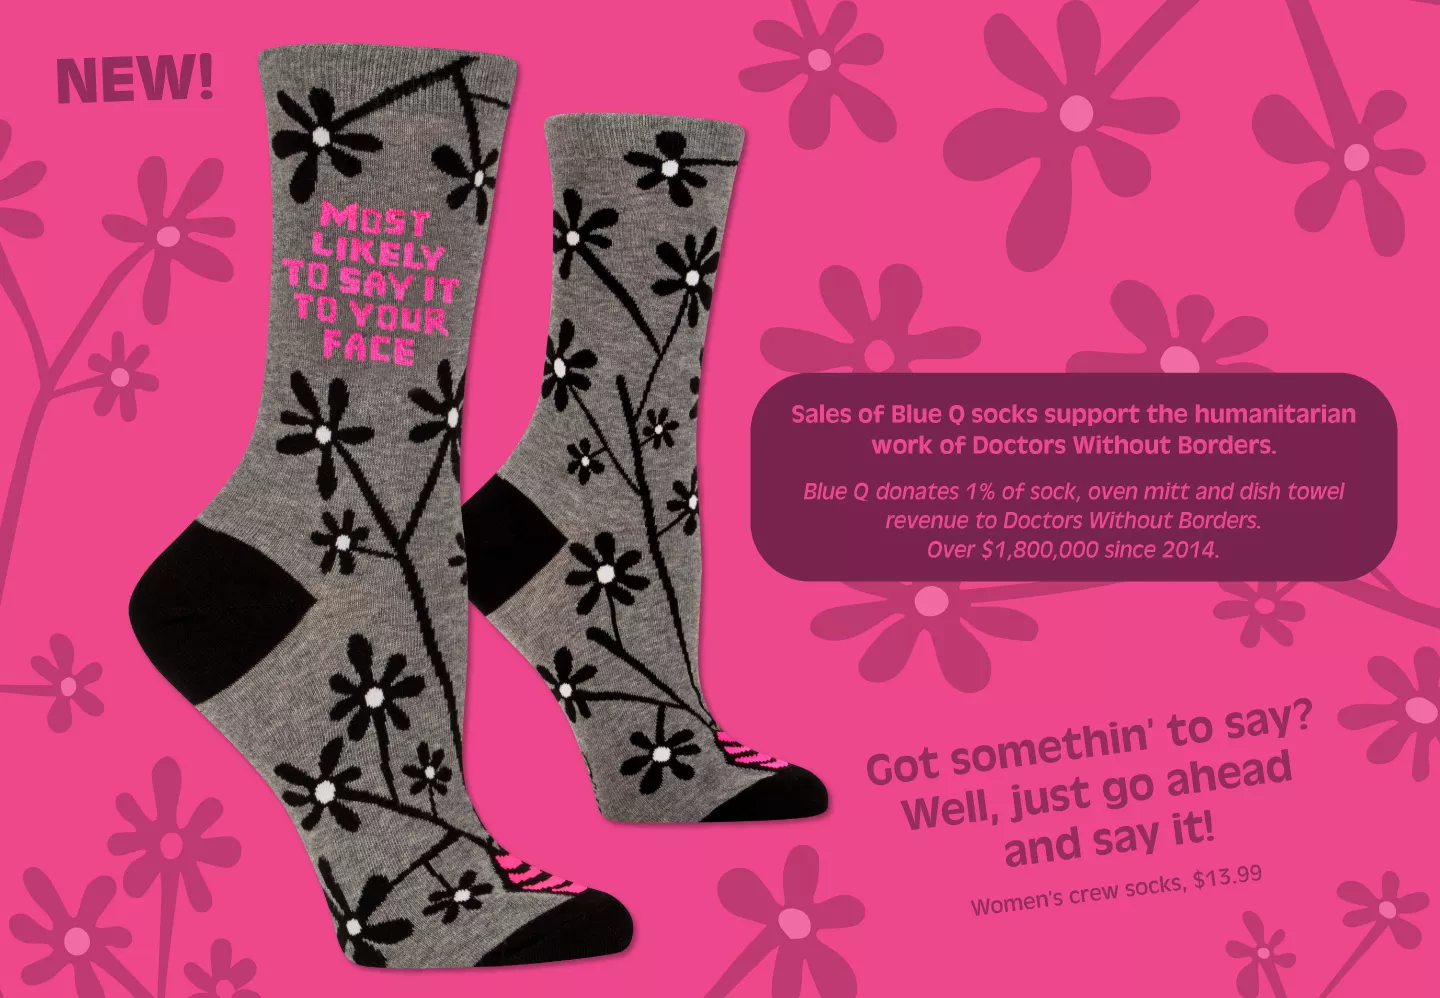 New Women's Crew Sock from Blue Q! Most Likely to Say it to Your Face!